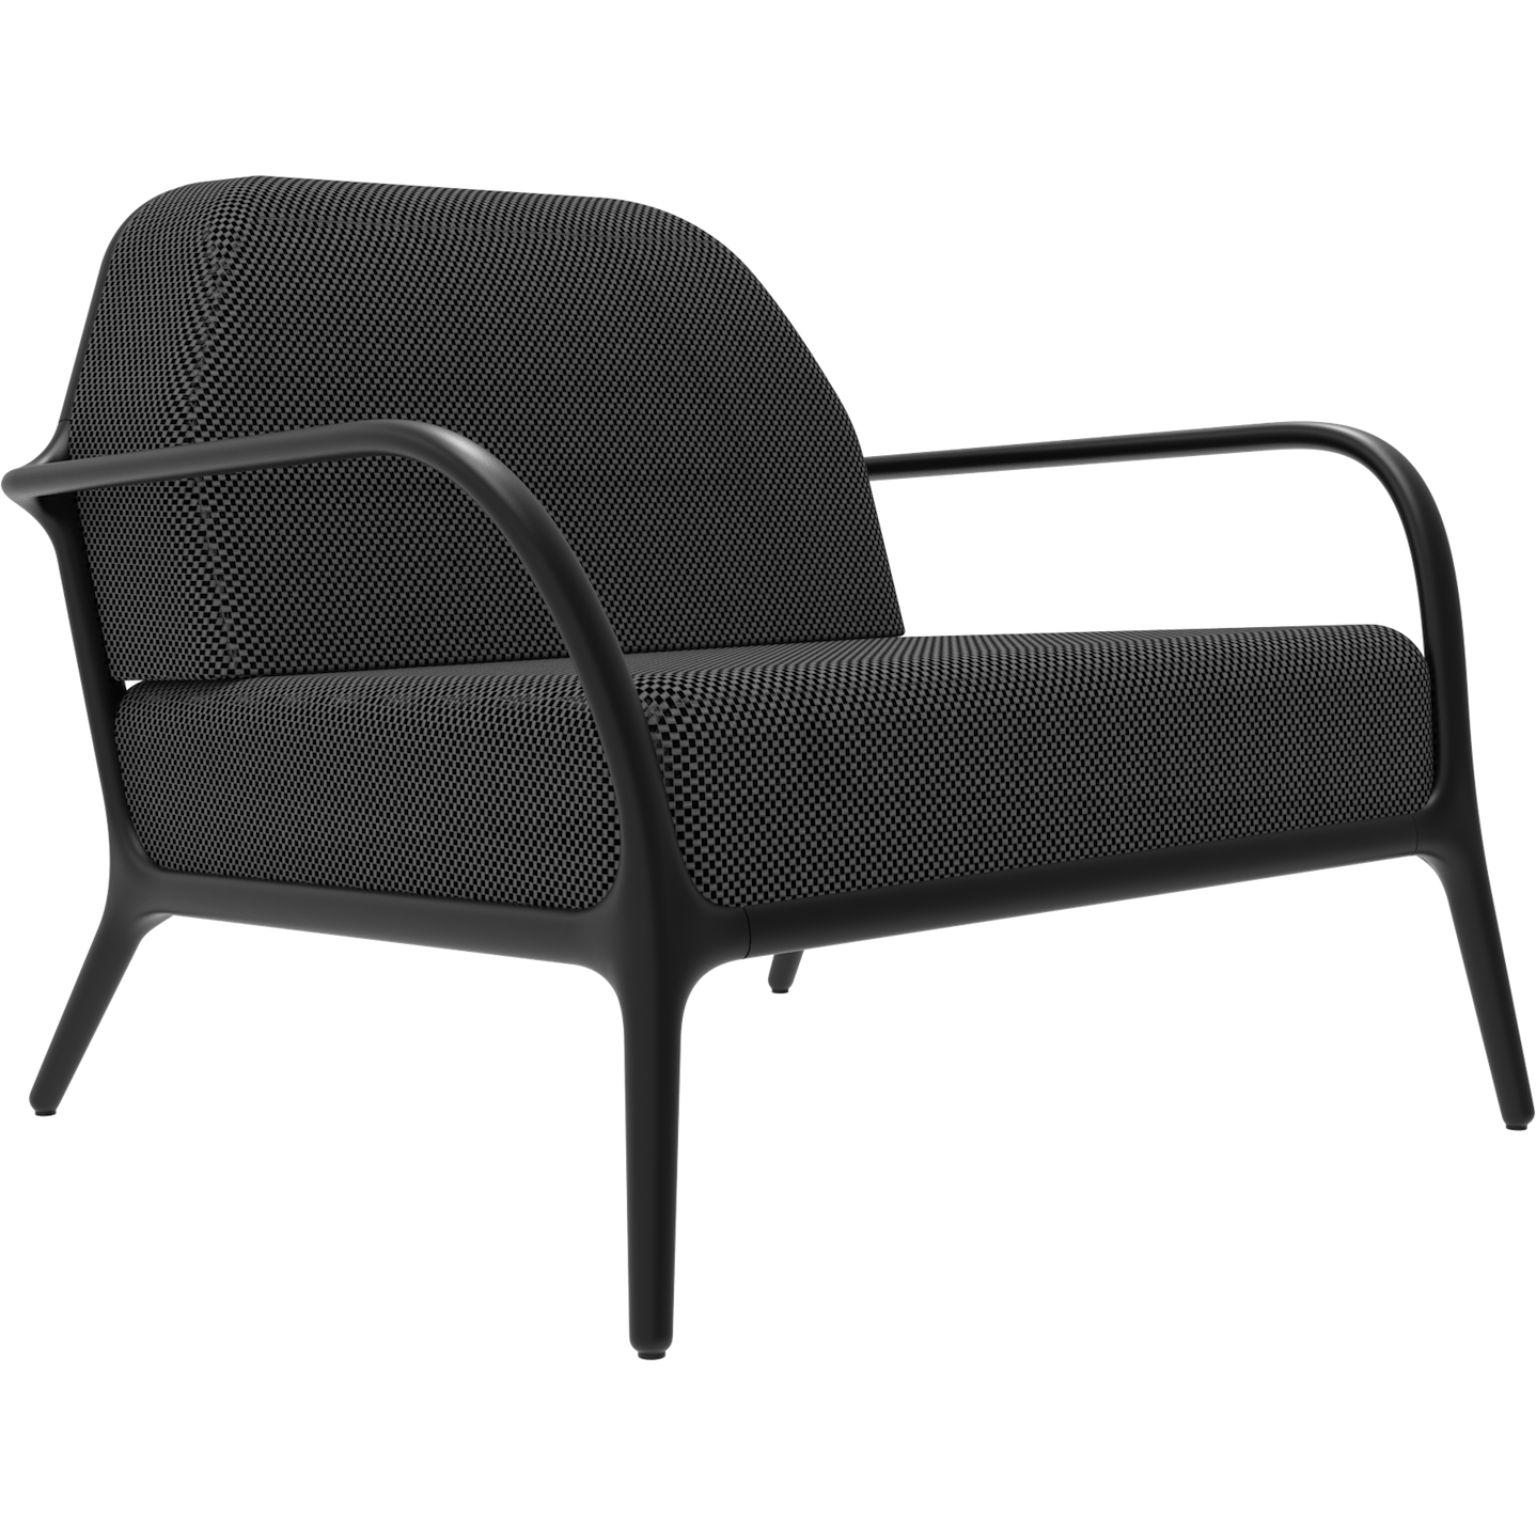 Xaloc Black Amchair by MOWEE
Dimensions: D 100 x W 102 x H 81 cm (Seat Height 42 cm)
Material: Aluminum, Upholstery
Weight: 29 kg
Also available in different colours and finishes. Please contact us.

 Xaloc synthesizes the lines of interior